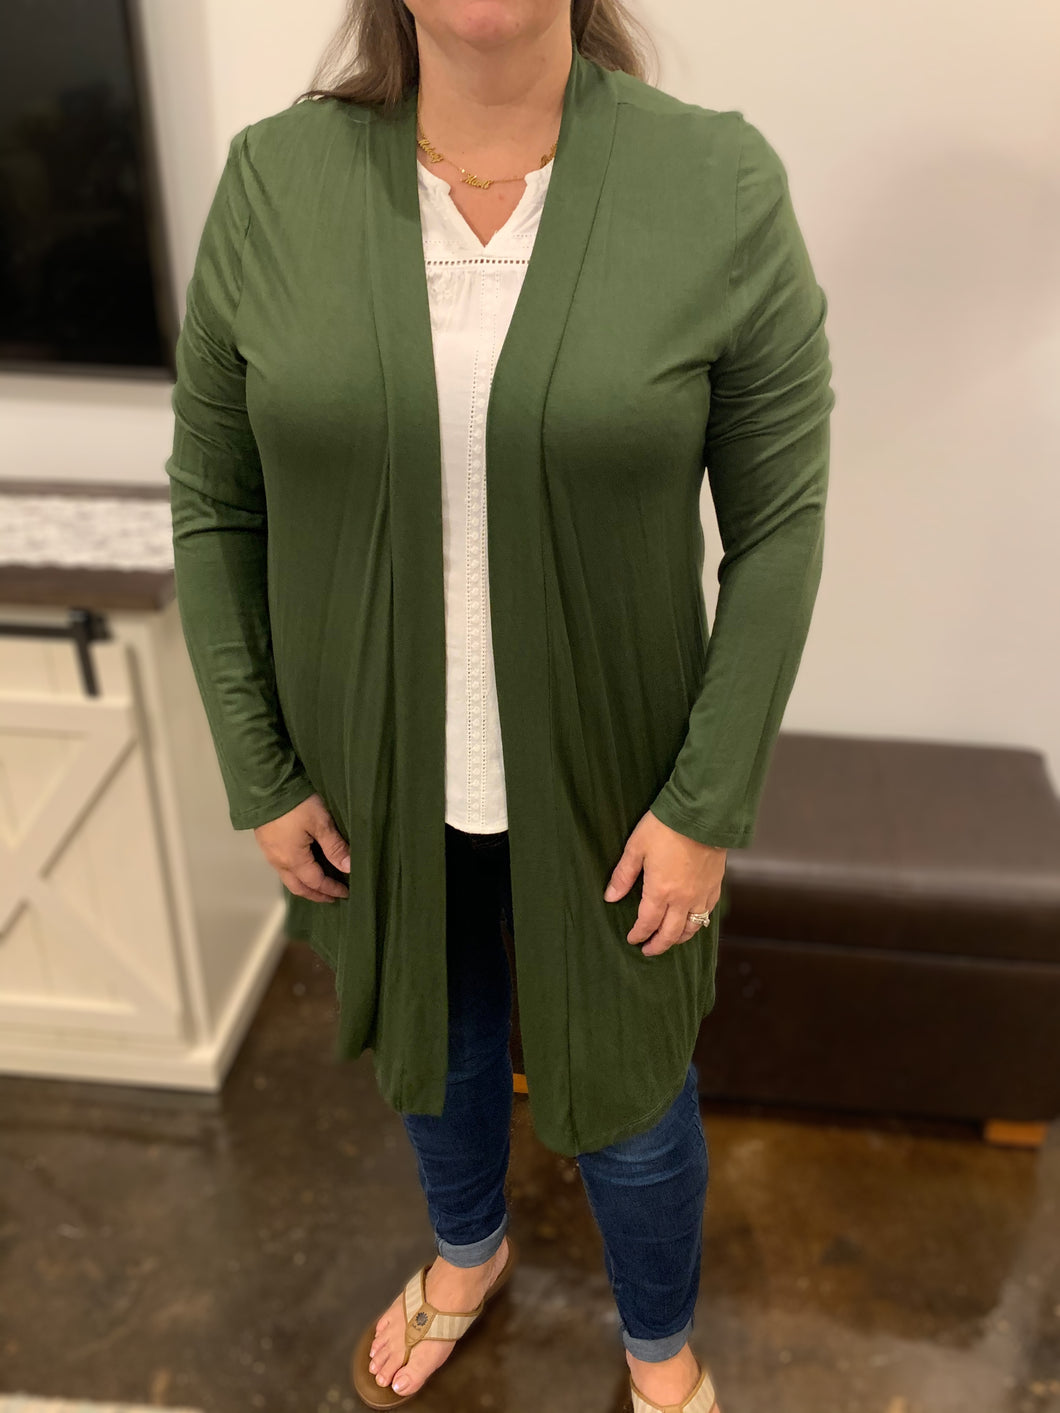 Smooth Transition Long Sleeve Cardigan - Army Green PLUS